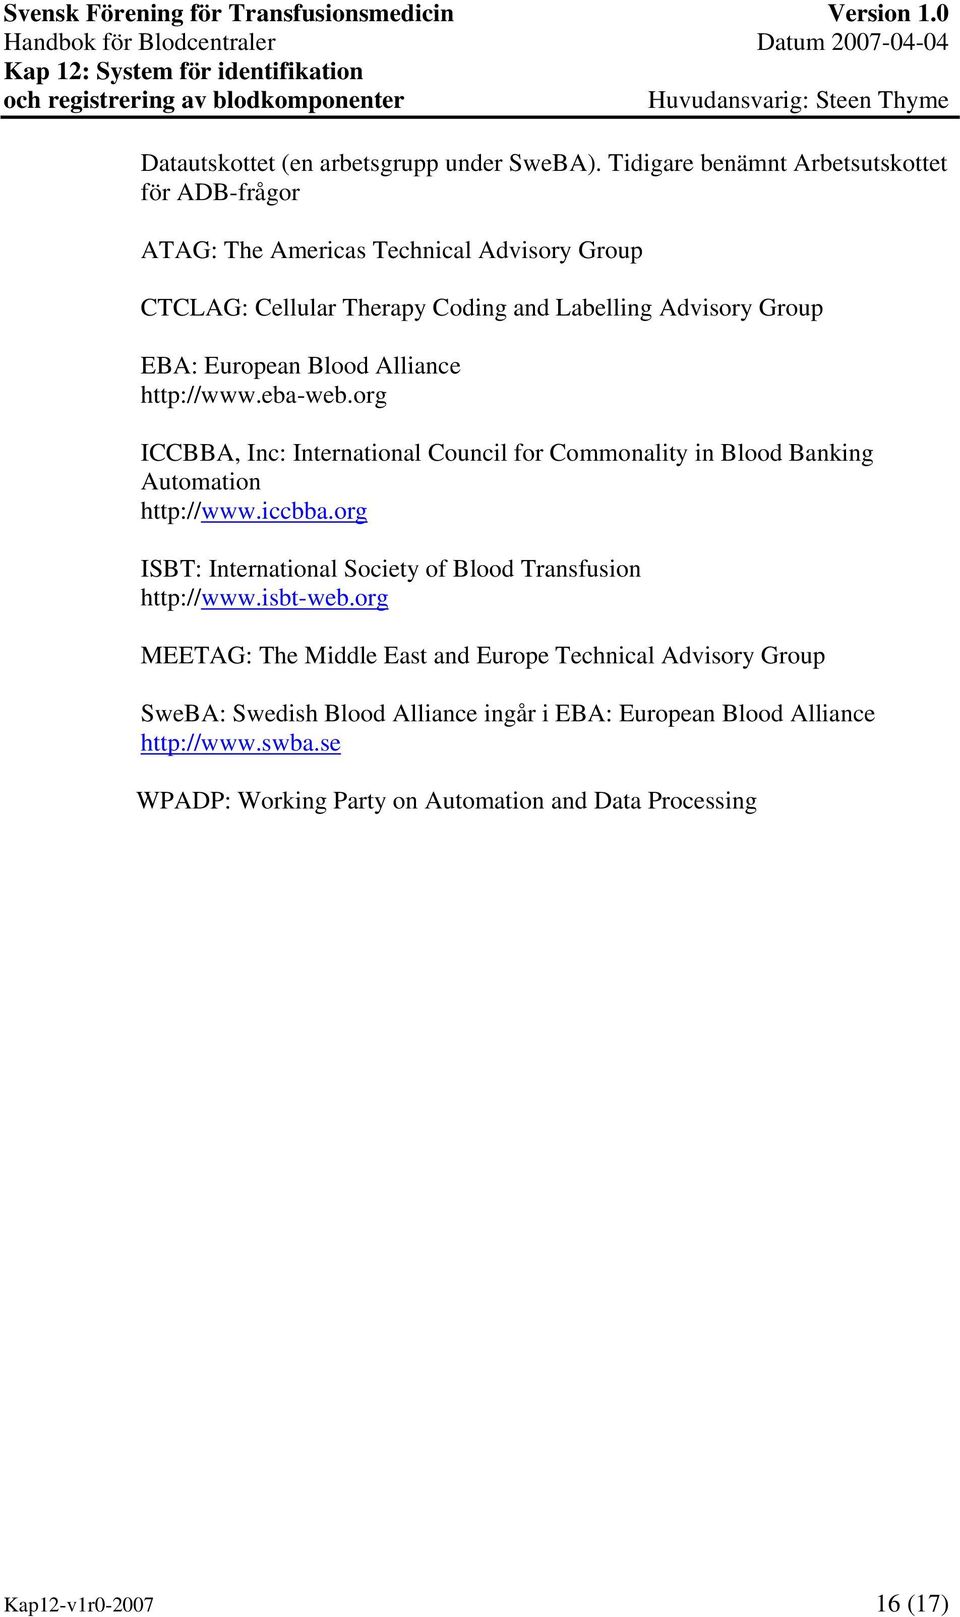 European Blood Alliance http://www.eba-web.org ICCBBA, Inc: International Council for Commonality in Blood Banking Automation http://www.iccbba.